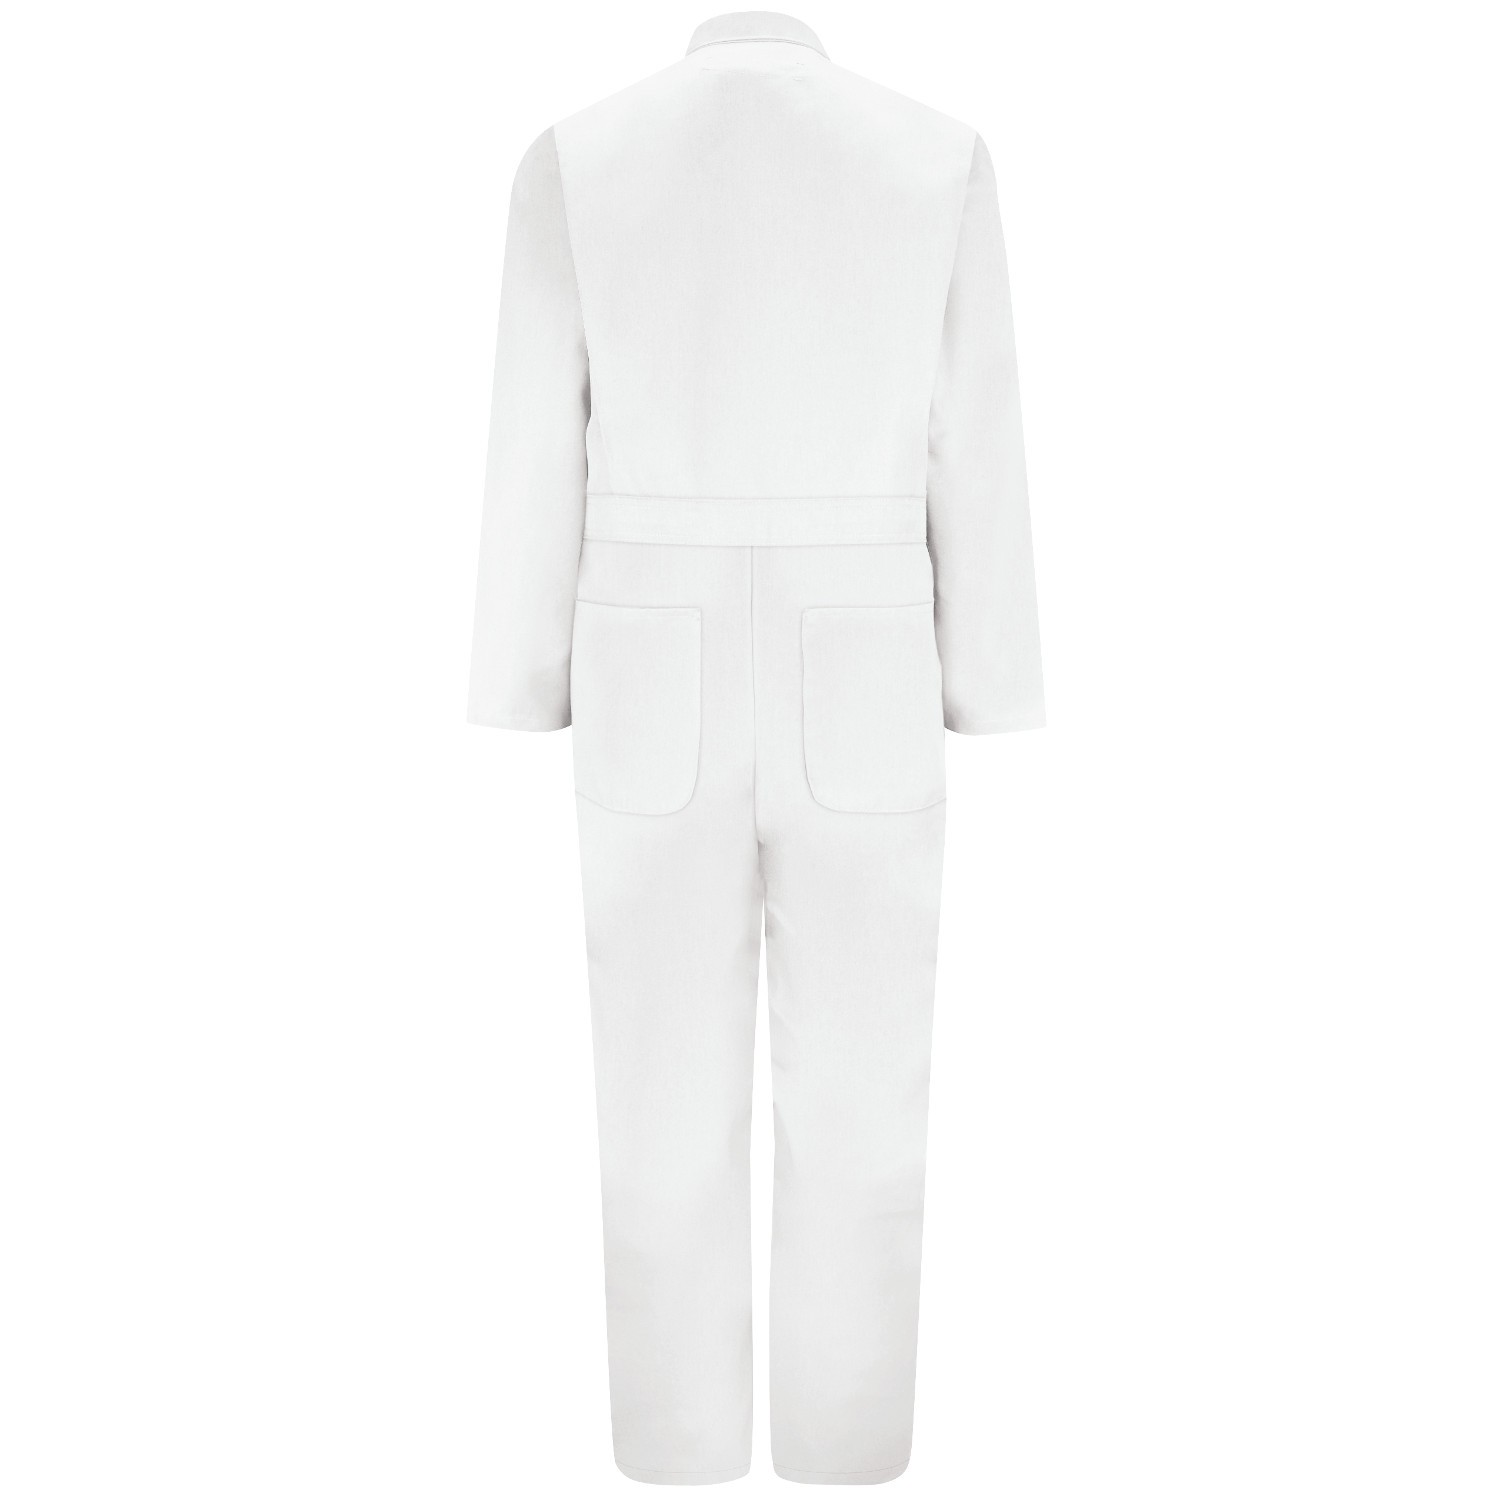 Red Kap CT10 Twill Action Back Coveralls - White | Full Source